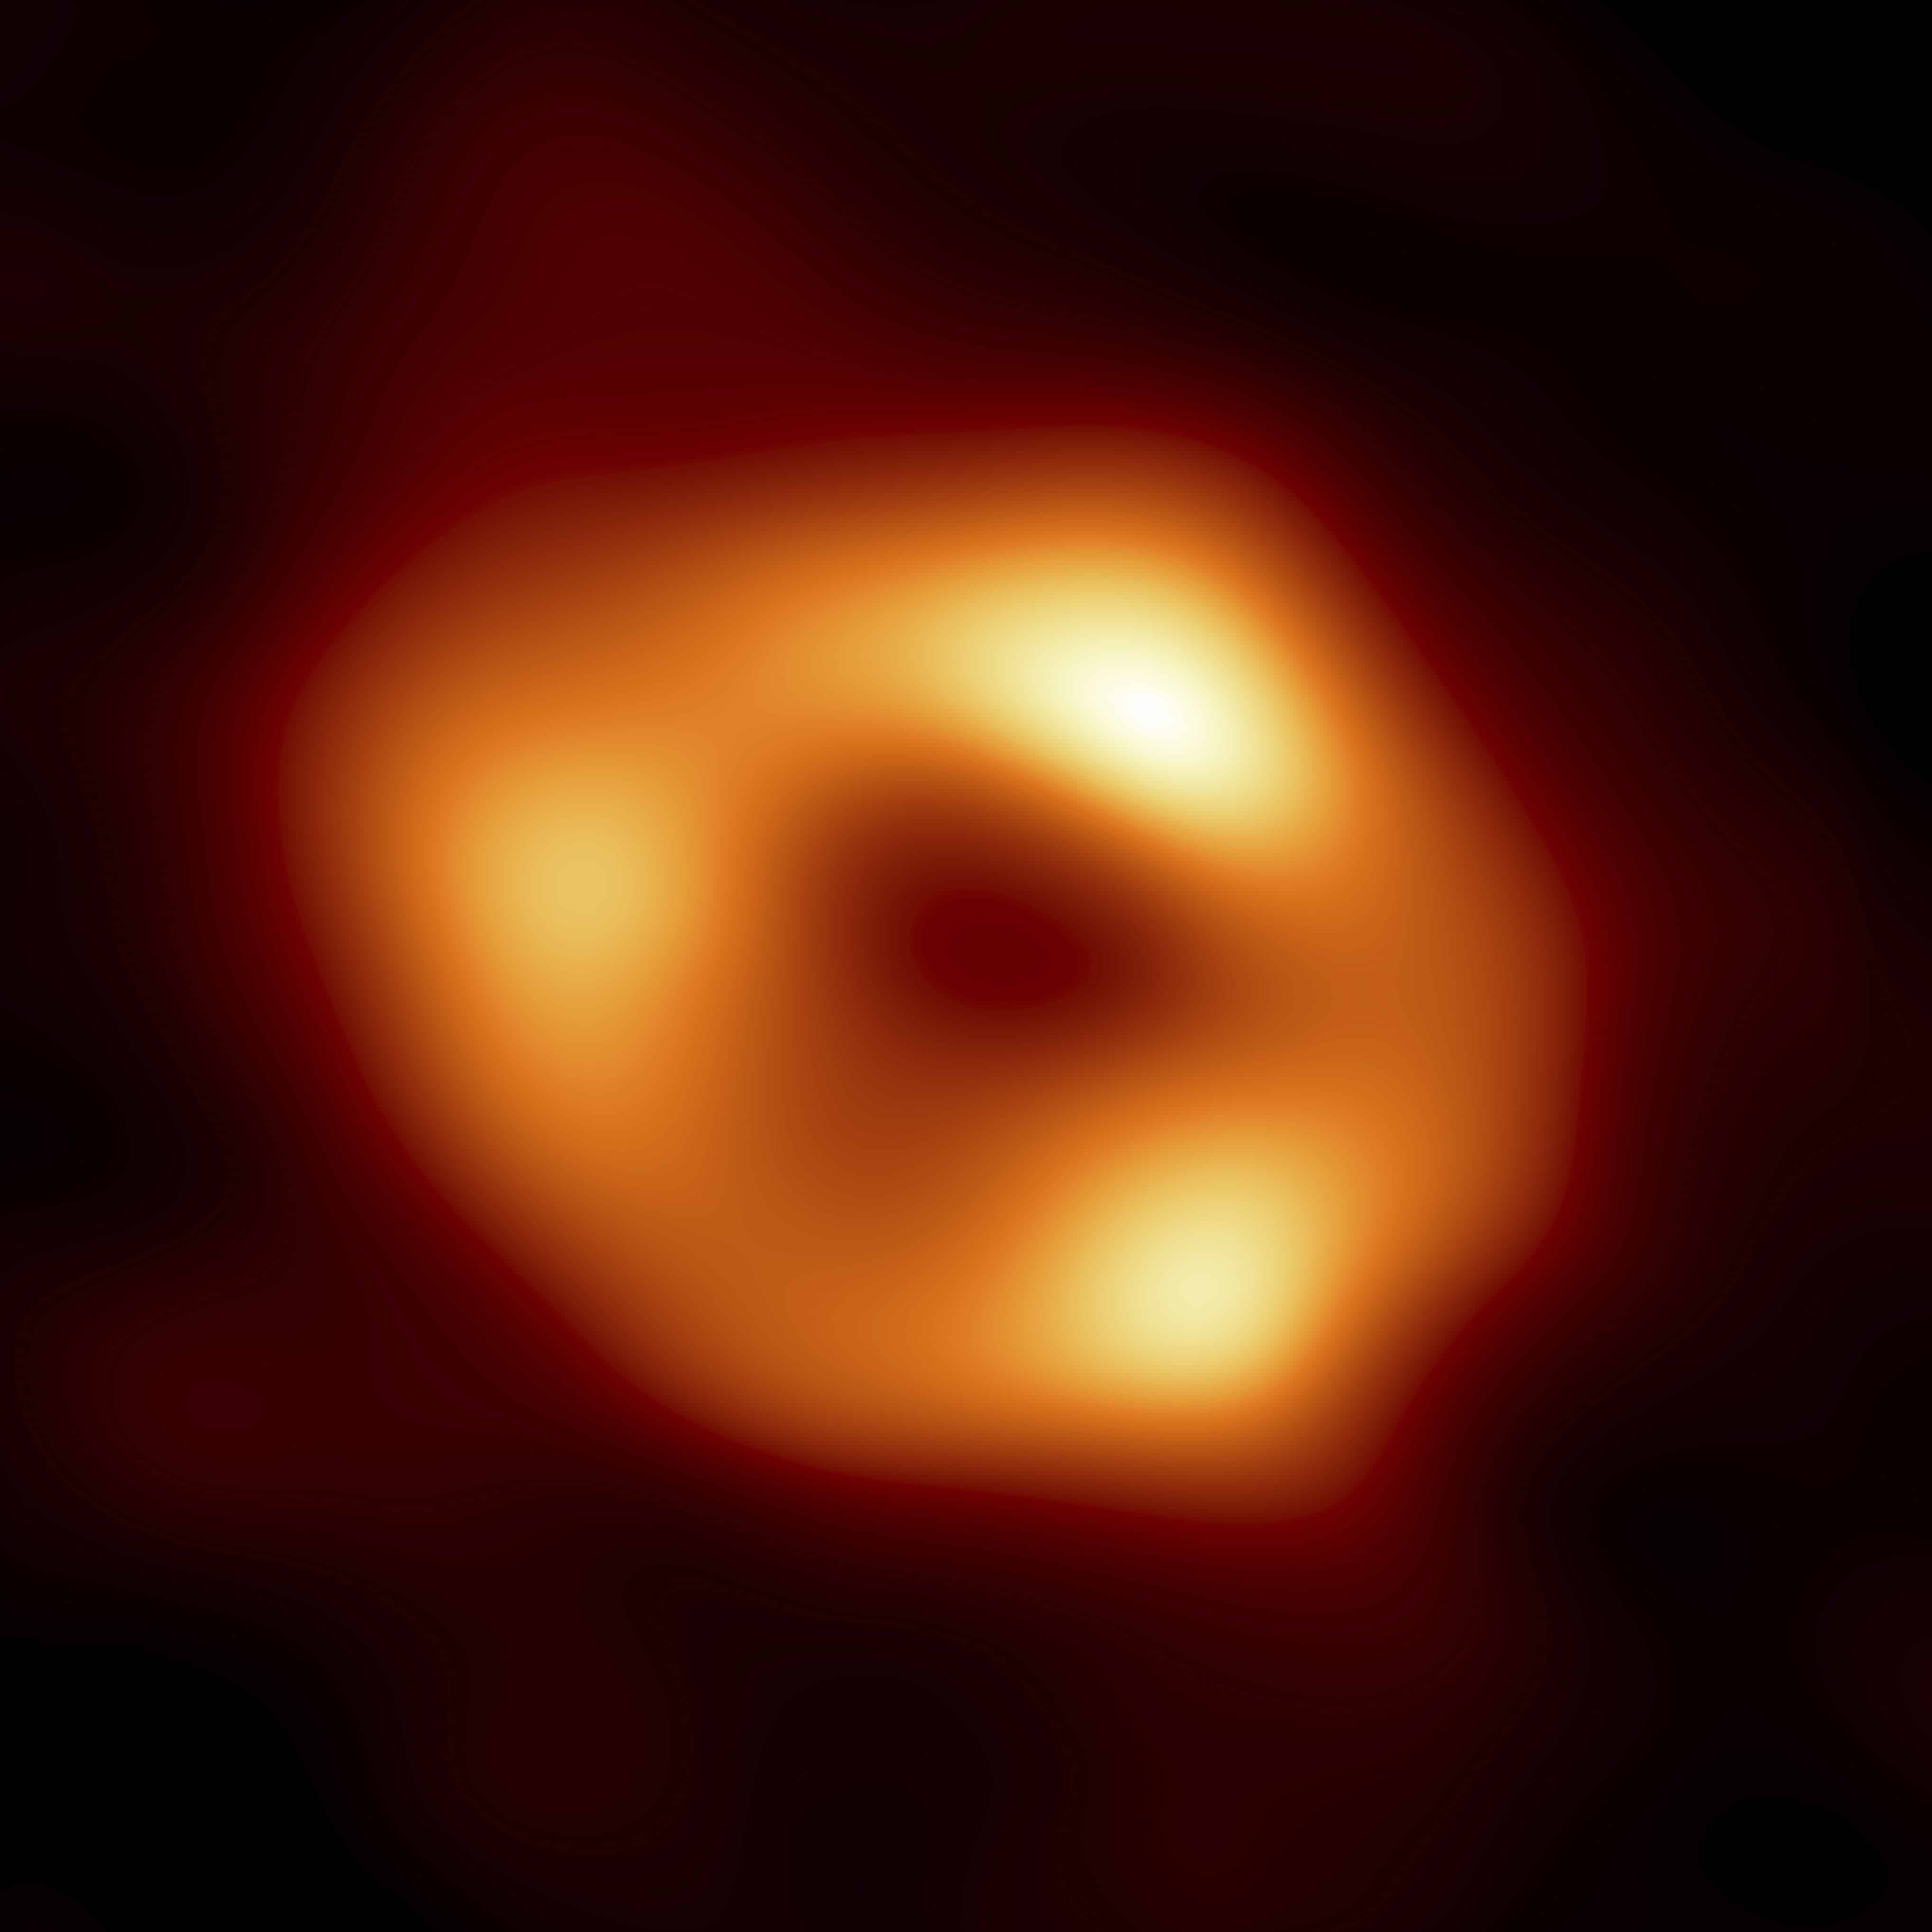 Astronomers Capture First Image of Milky Way’s Huge Black Hole